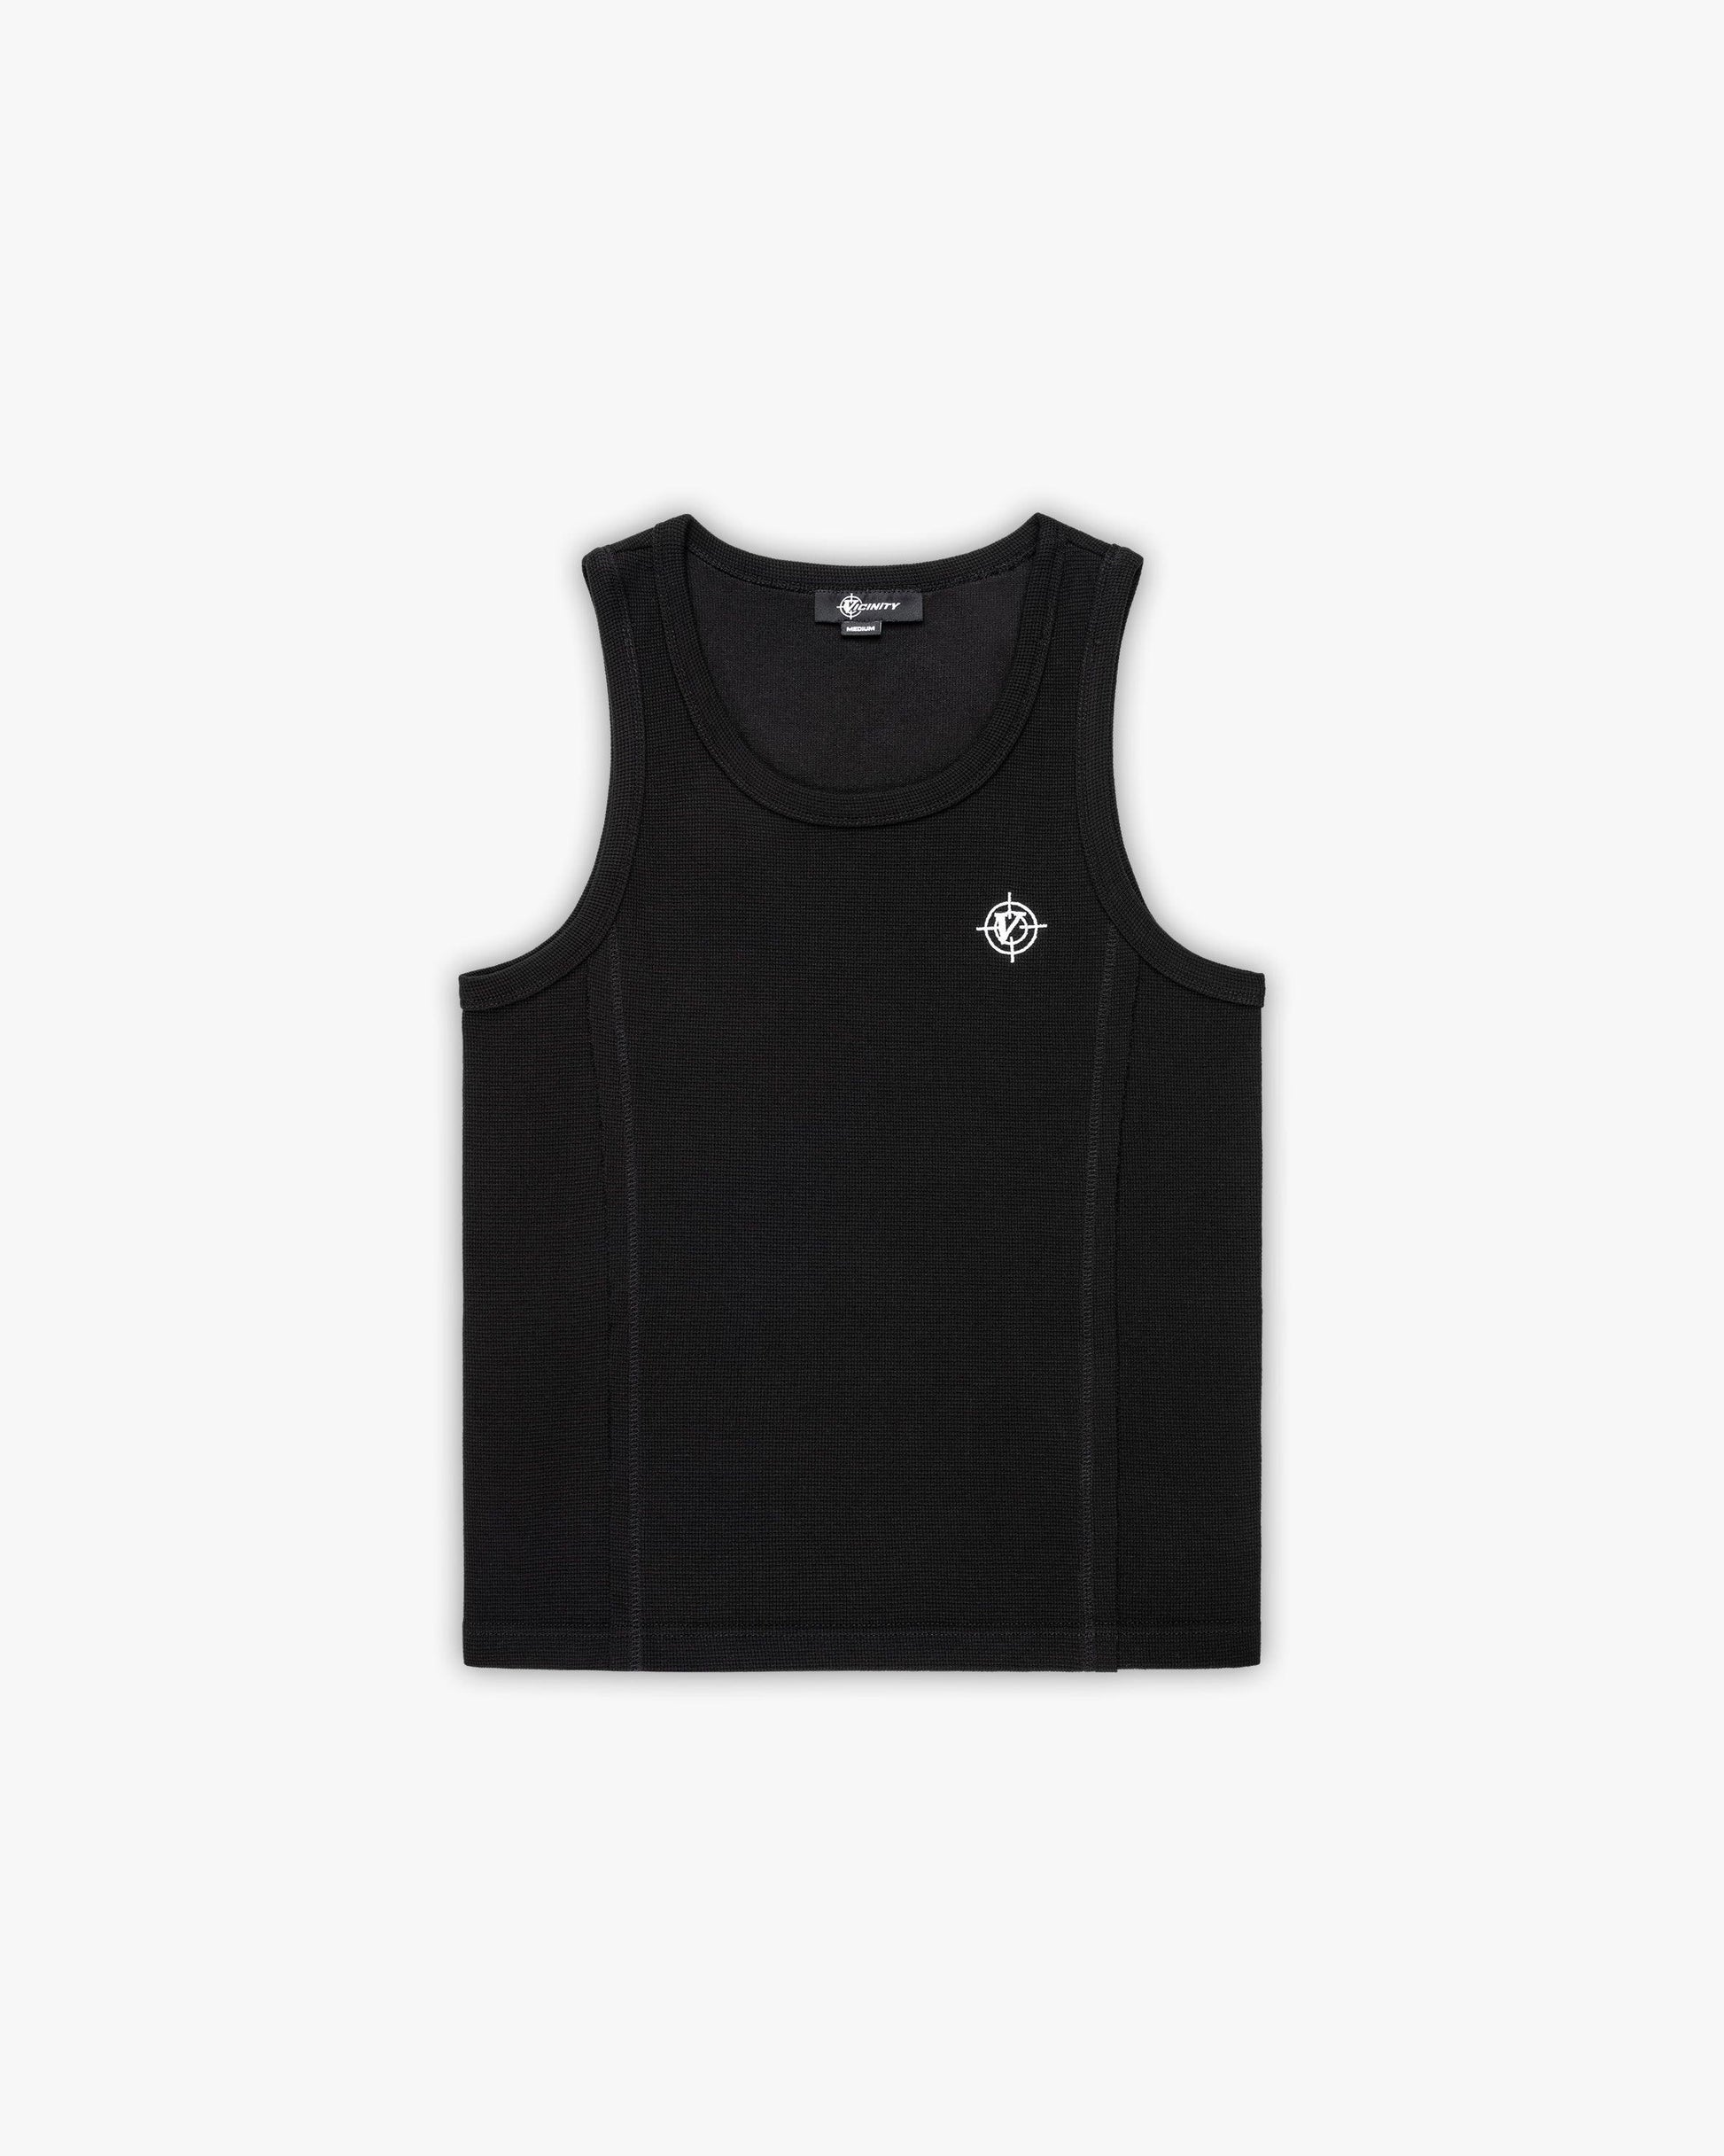 TANKTOPS DOUBLE PACK (BLACK & WHITE) - VICINITY